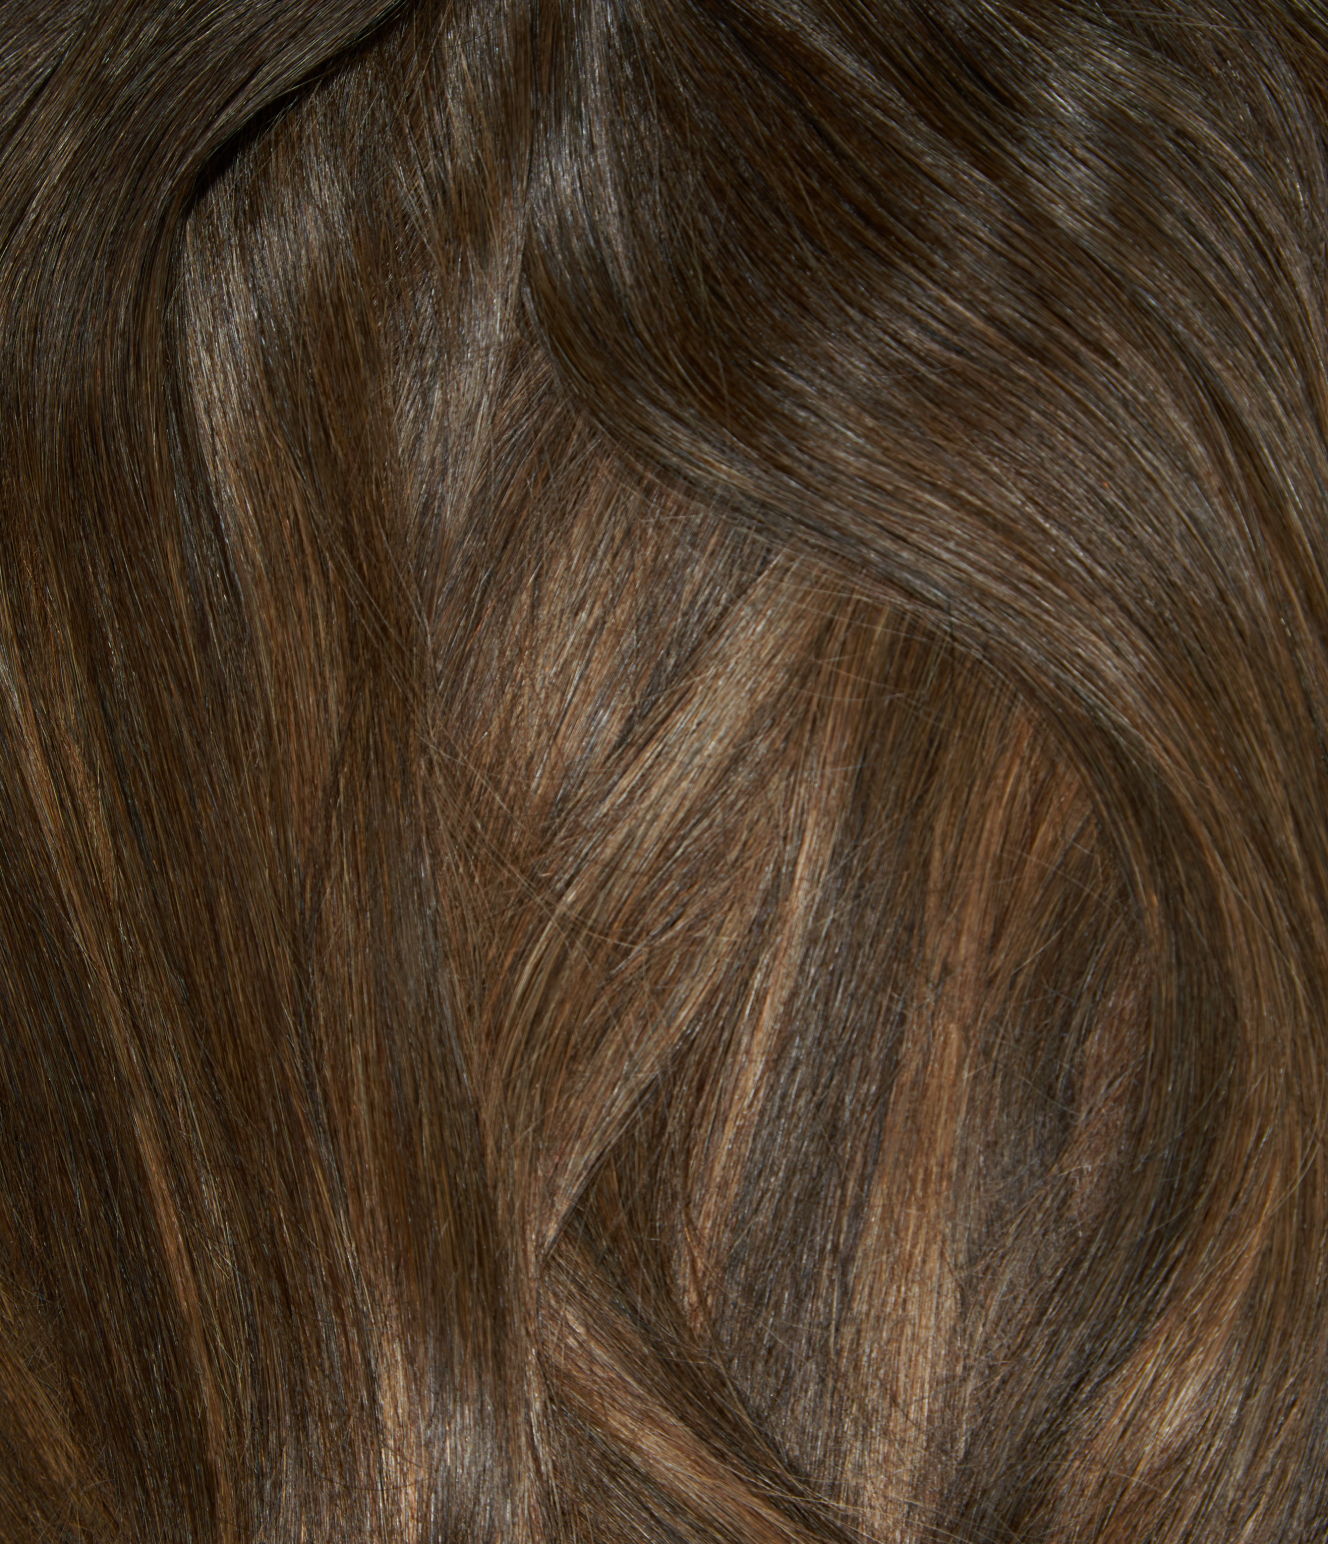 A close-up of brown hair with balayage. The hair has a subtle, graduated color that is a medium brown at the roots and is a lighter, caramel brown towards the ends.